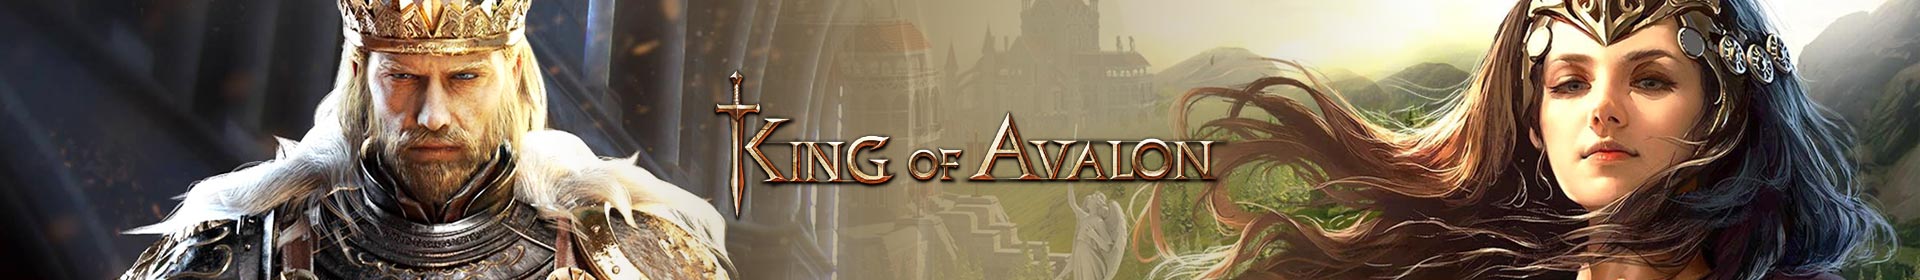 King of Avalon Resources